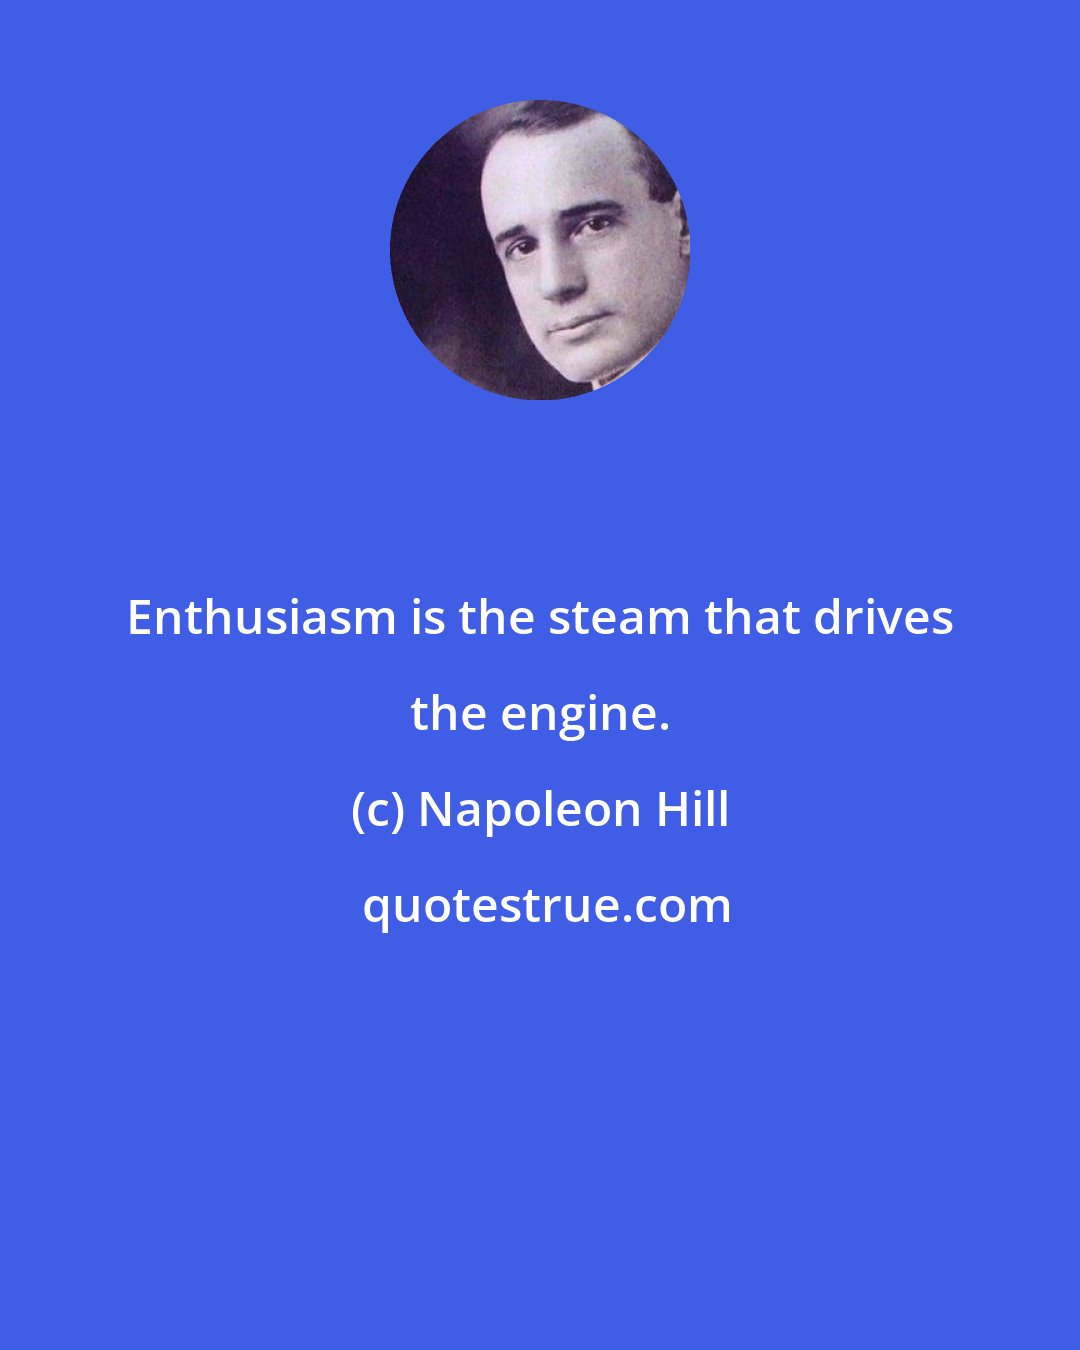 Napoleon Hill: Enthusiasm is the steam that drives the engine.